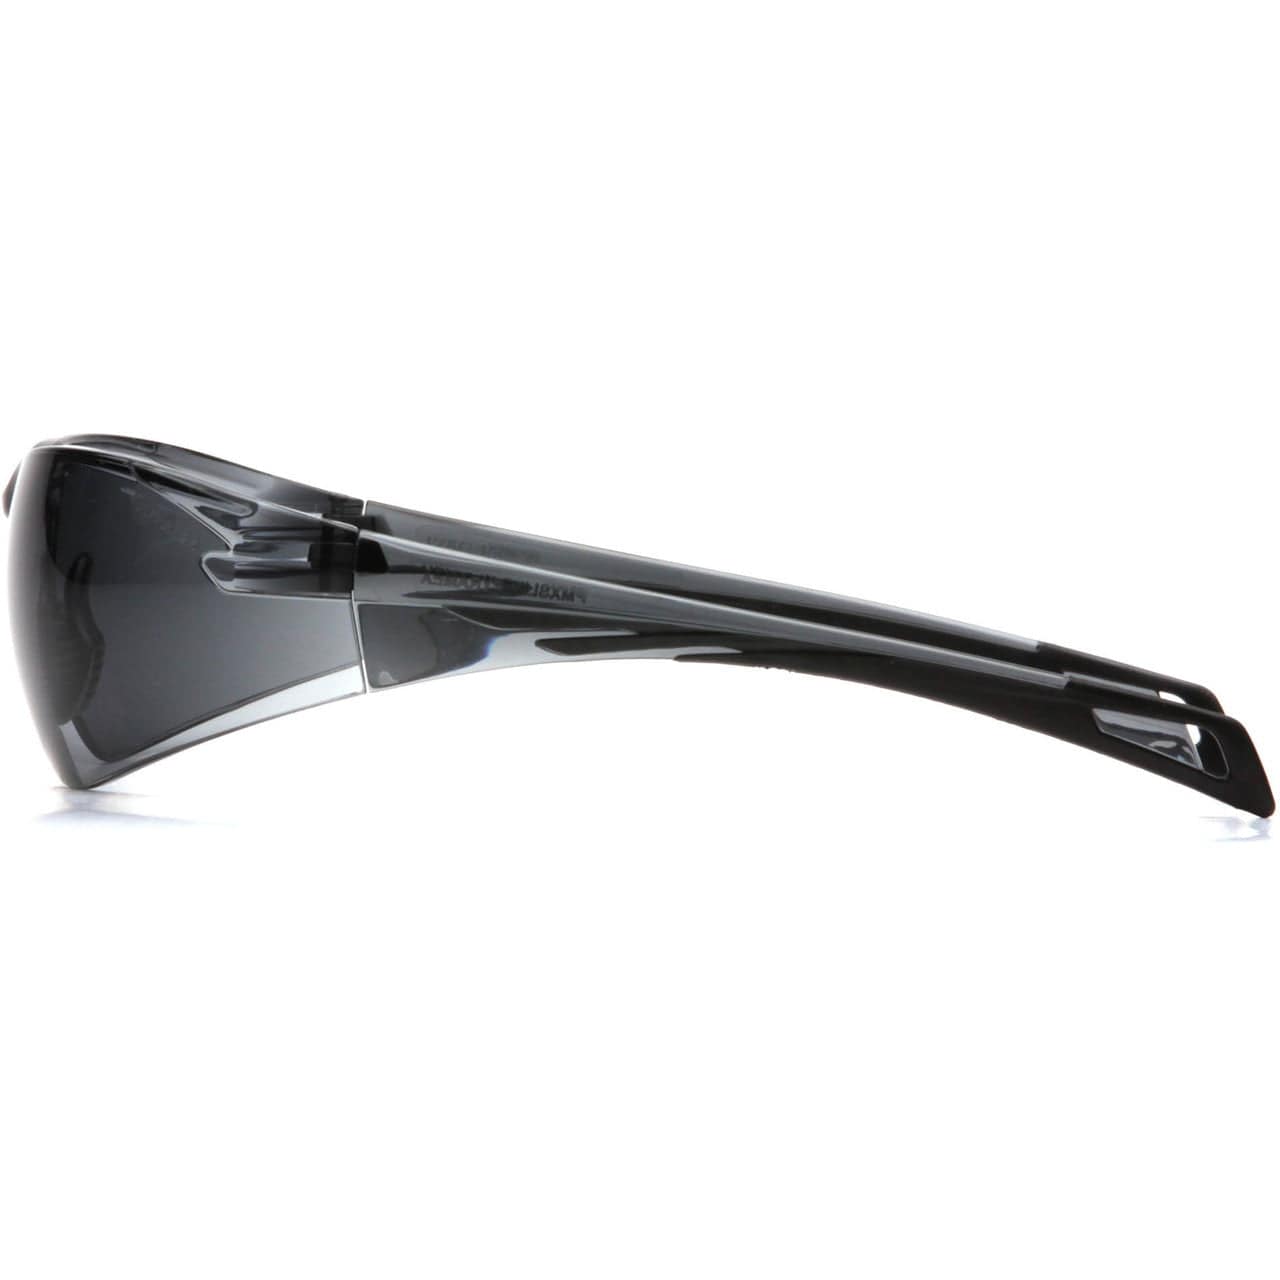 Pyramex PMXSlim Safety Glasses with Black Temples and Gray Anti-Fog Lens SB7120ST Side View